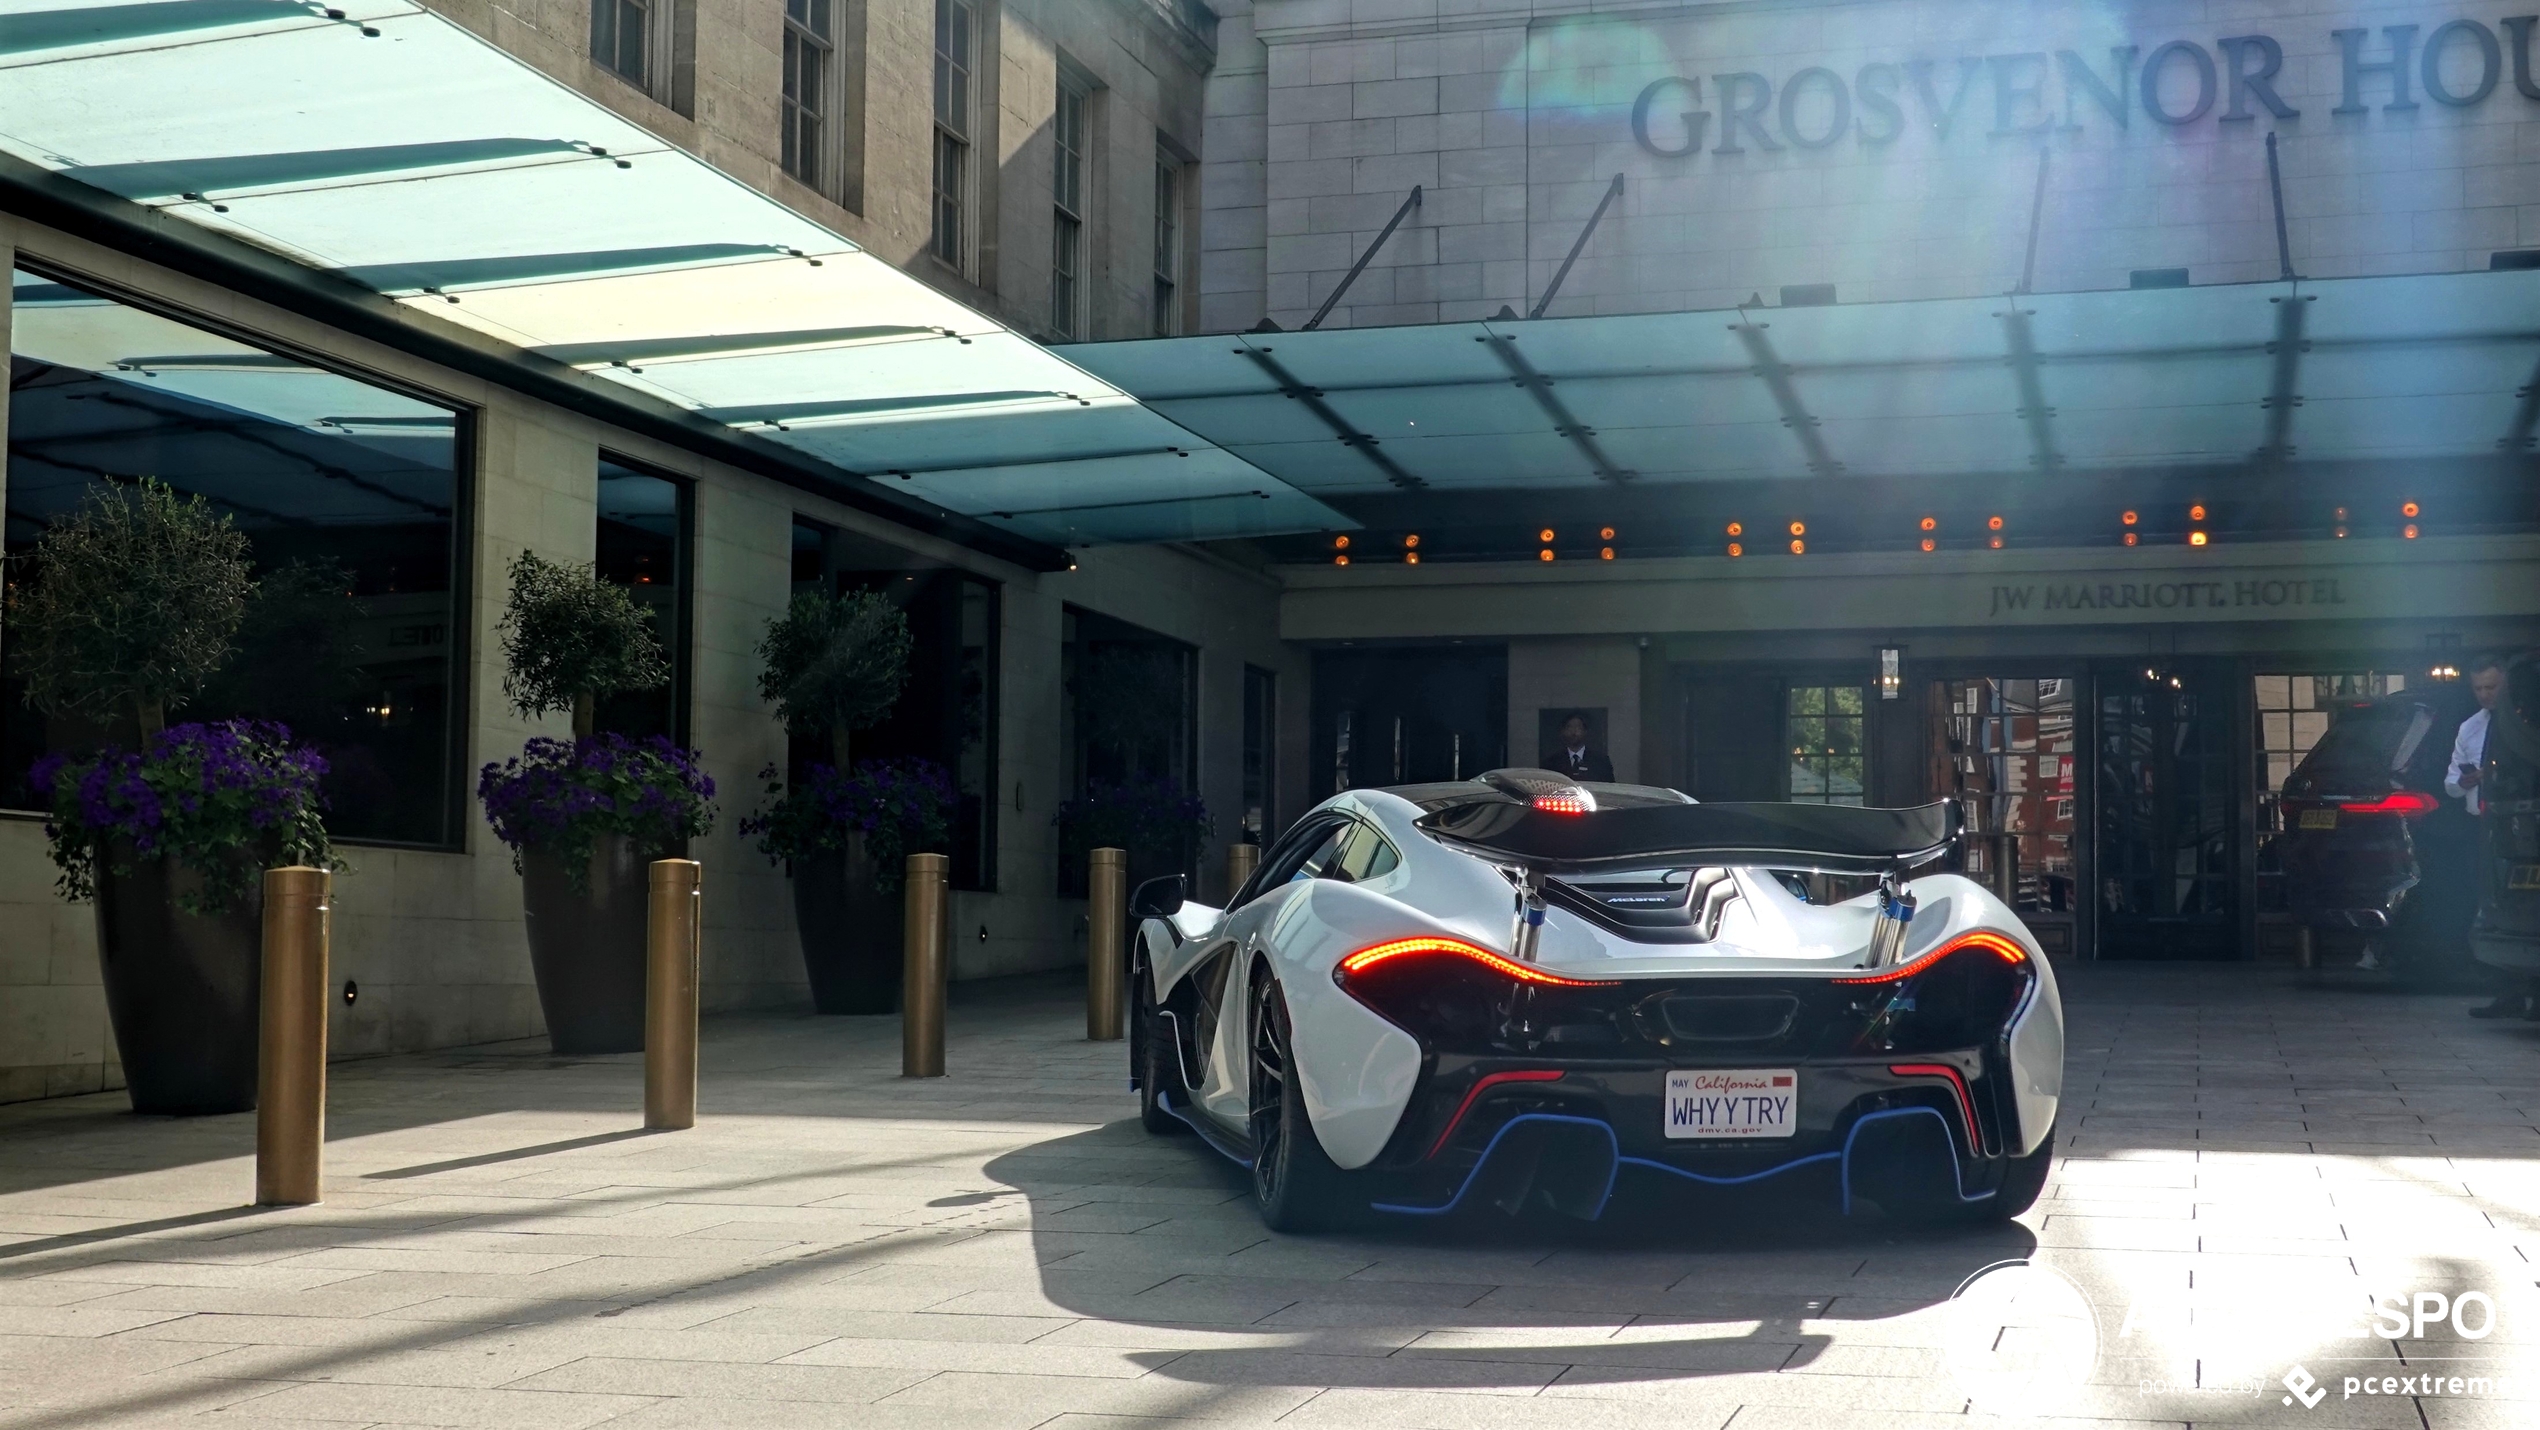 Mclaren P1 from California shows up in central London